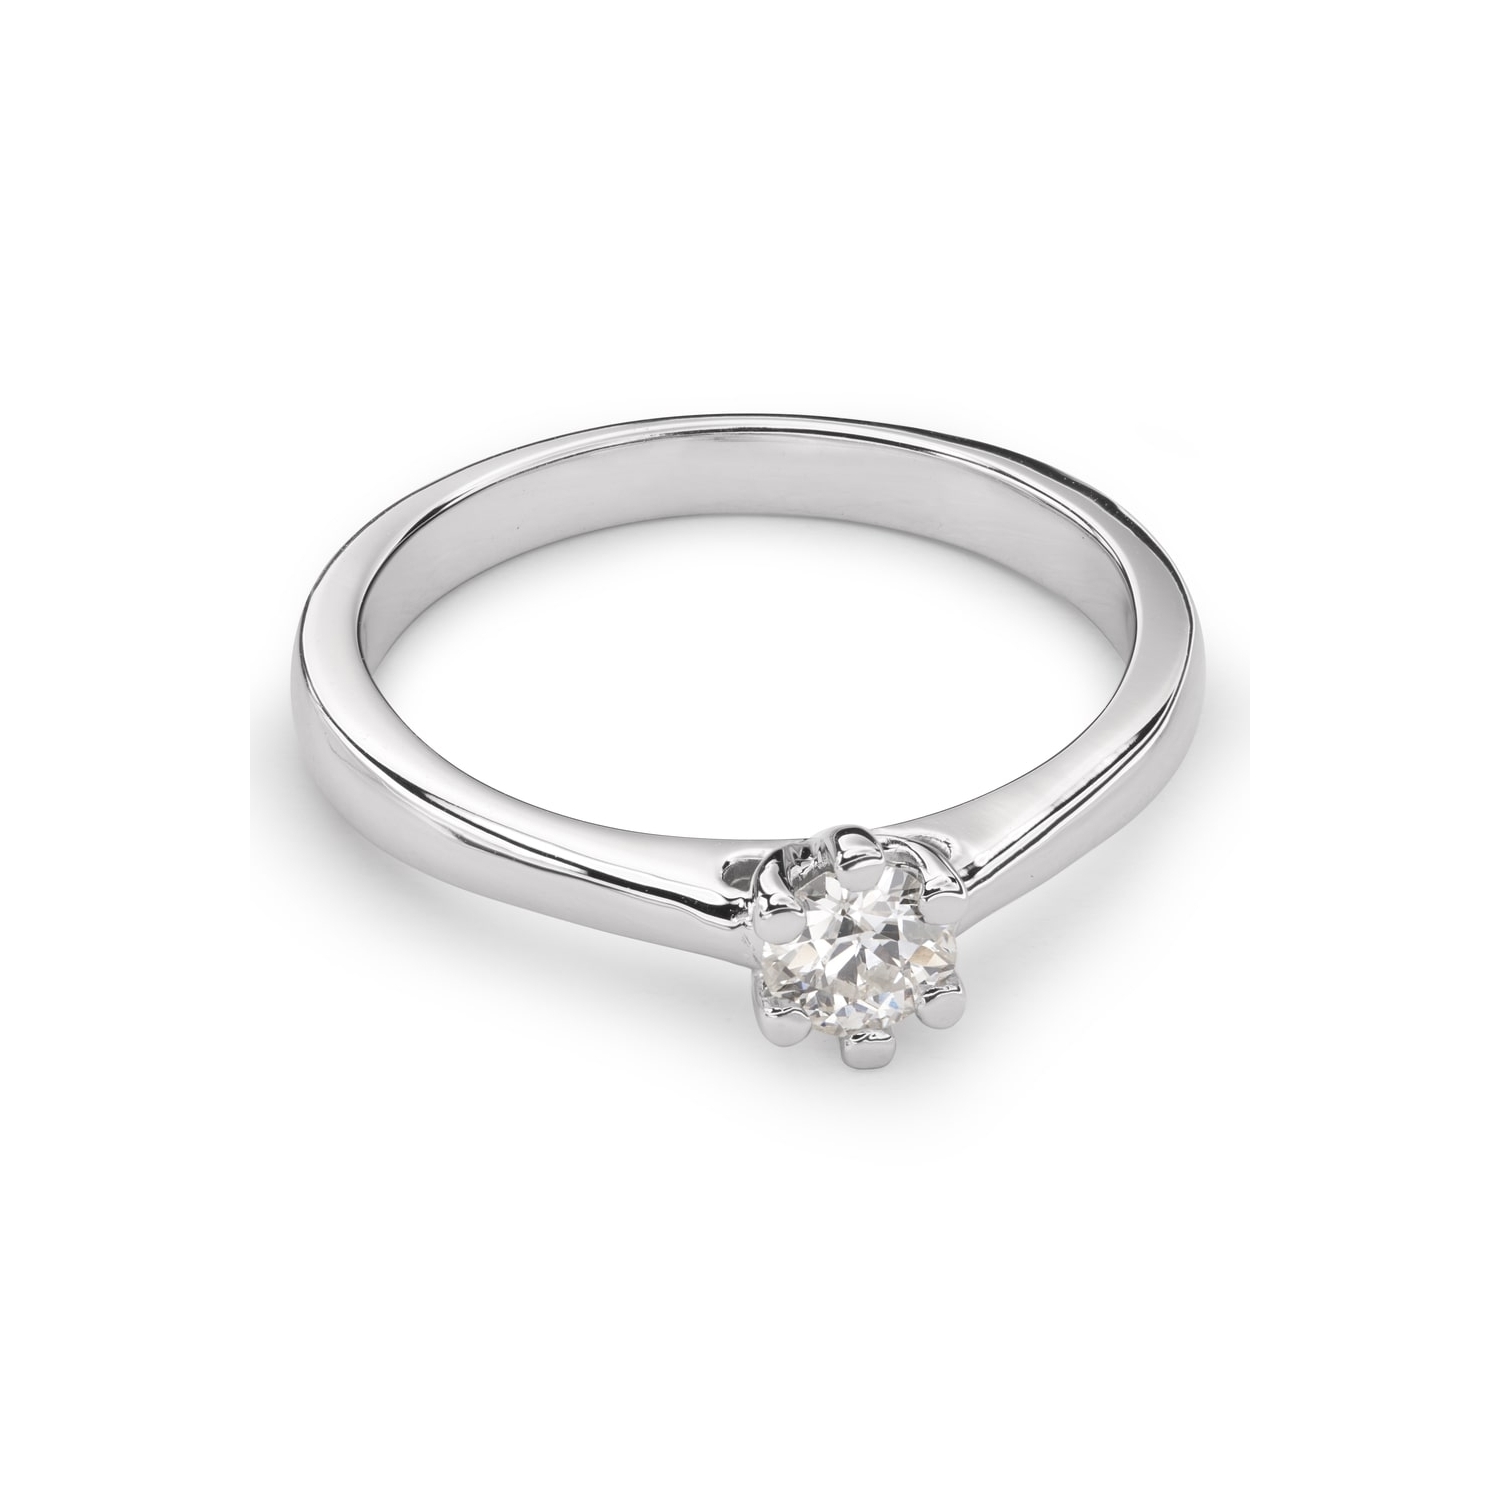 Engagement ring with diamond "The queen 69"